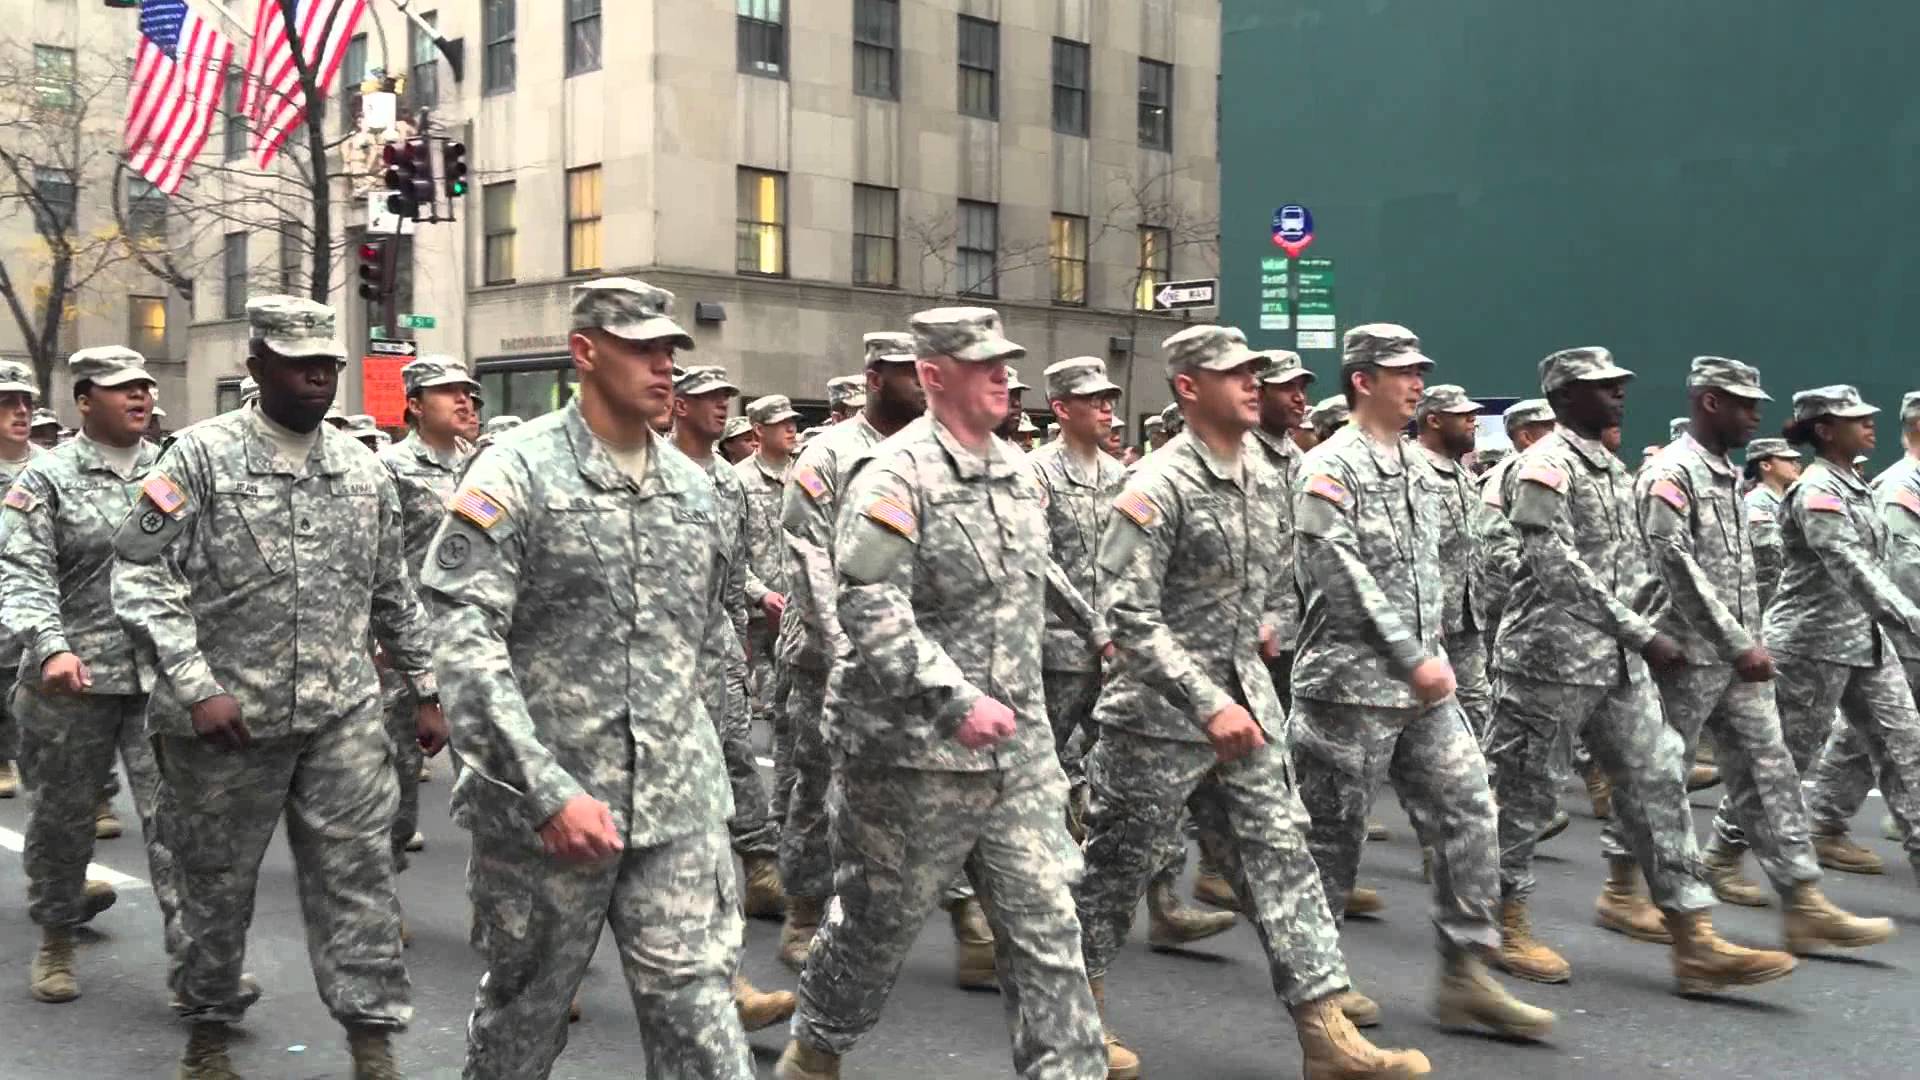 UNITED STATES ARMY SOLDIERS PARTICIPATING IN TODAY'S VETERANS DAY ...